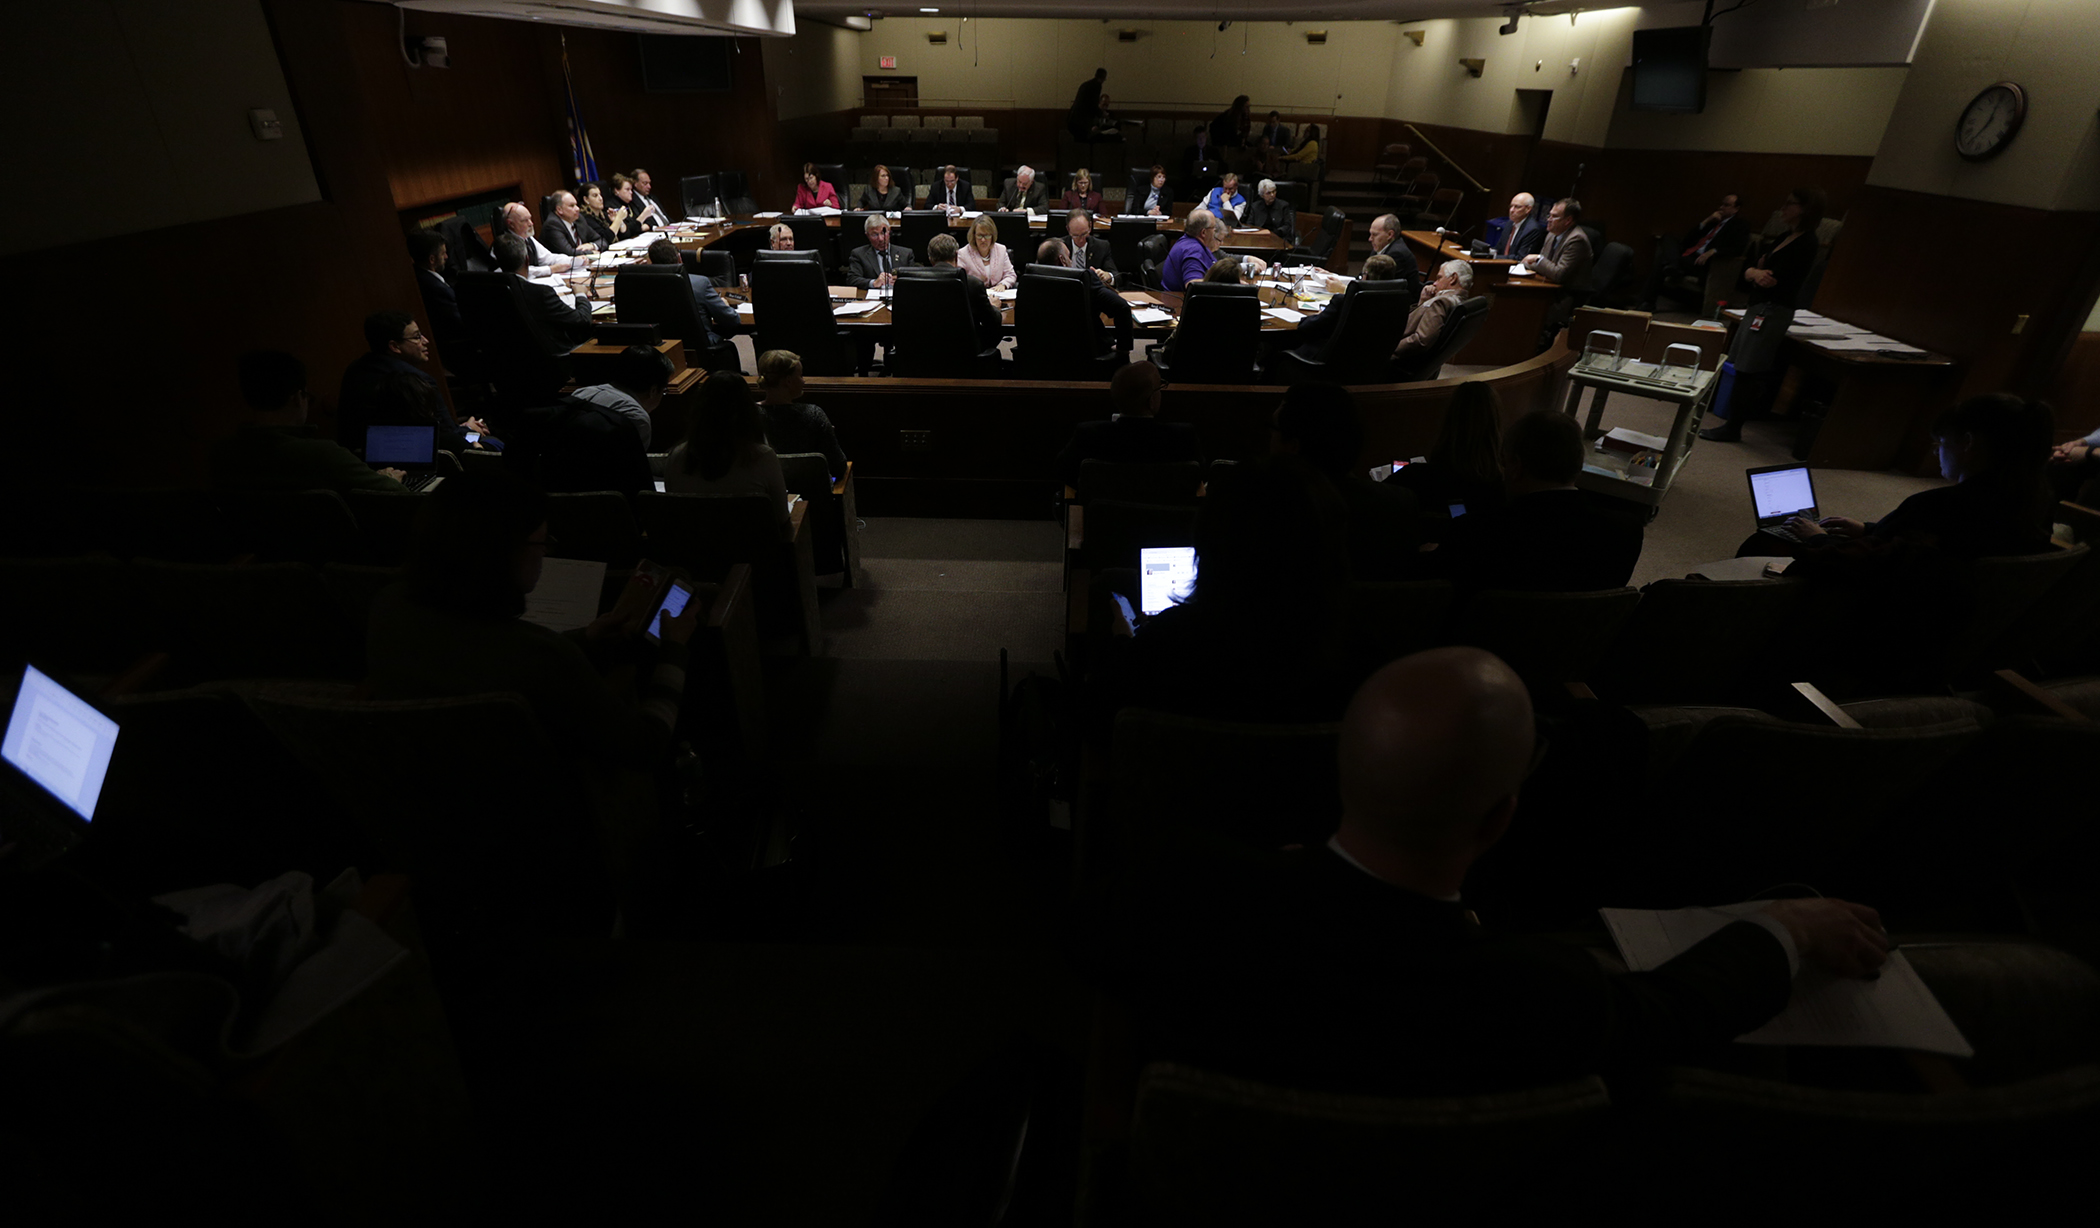 An early evening power outage in the Capitol Complex Jan. 11 temporarily threw the House Ways and Means Committee hearing on HF1 into semi-darkness. Photo by Paul Battaglia